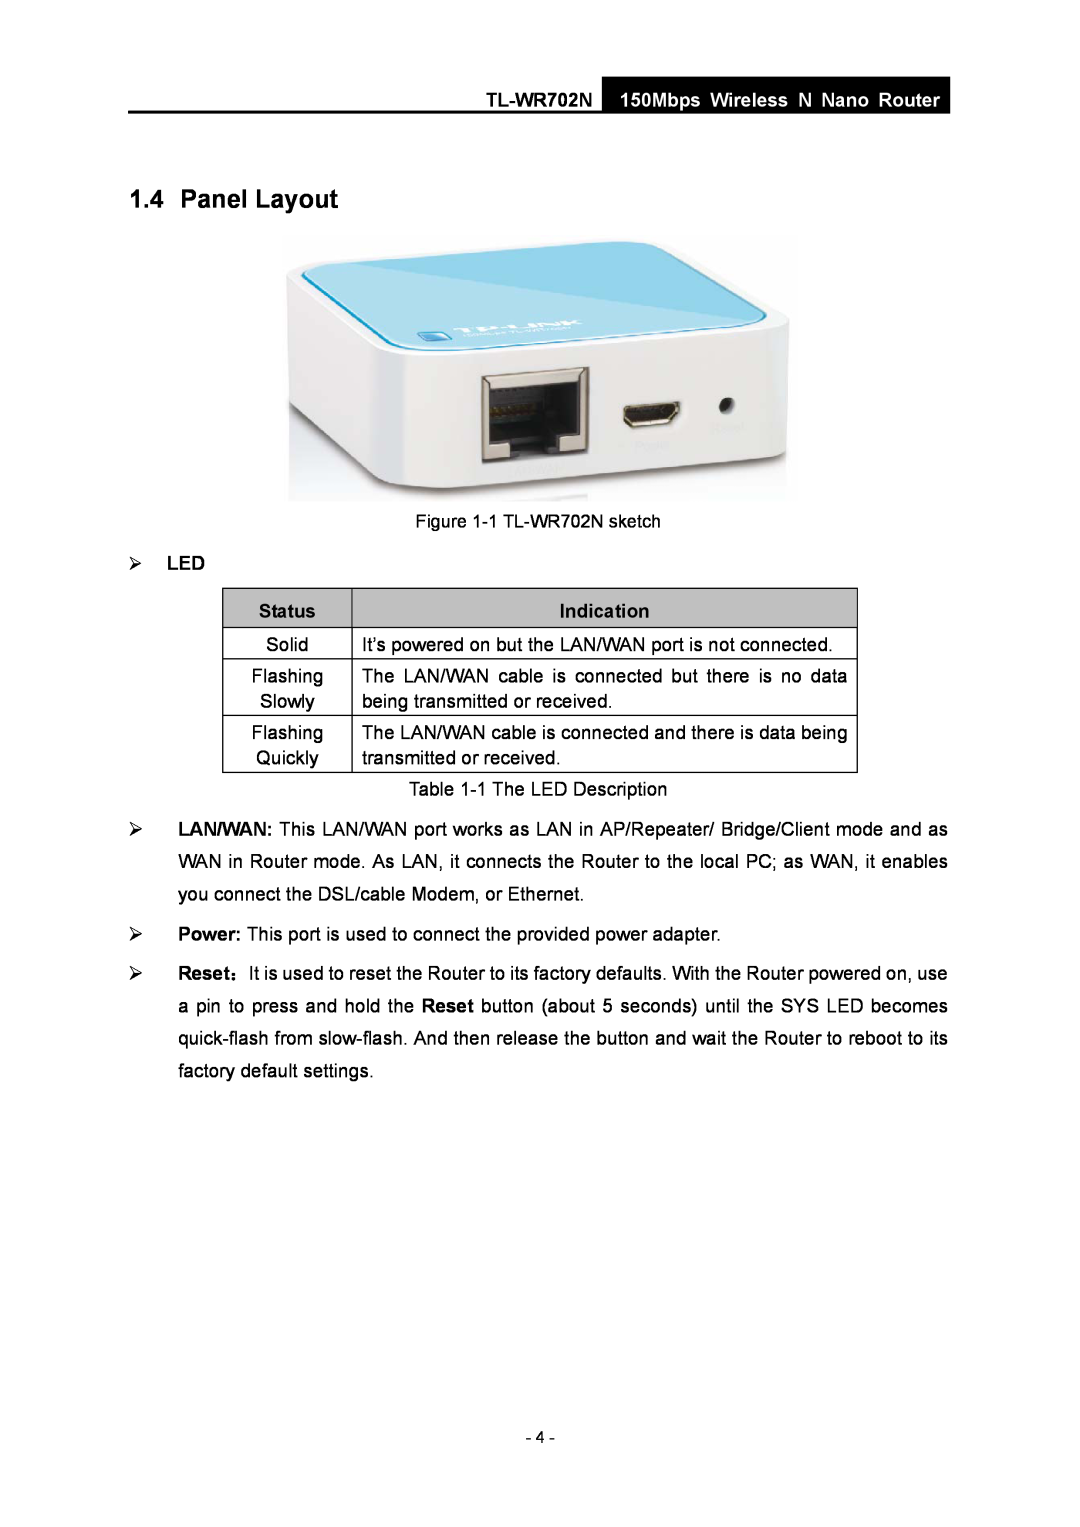 TP-Link TL-WR702N manual Panel Layout, ¾ LED, Status, Indication, 150Mbps Wireless N Nano Router 